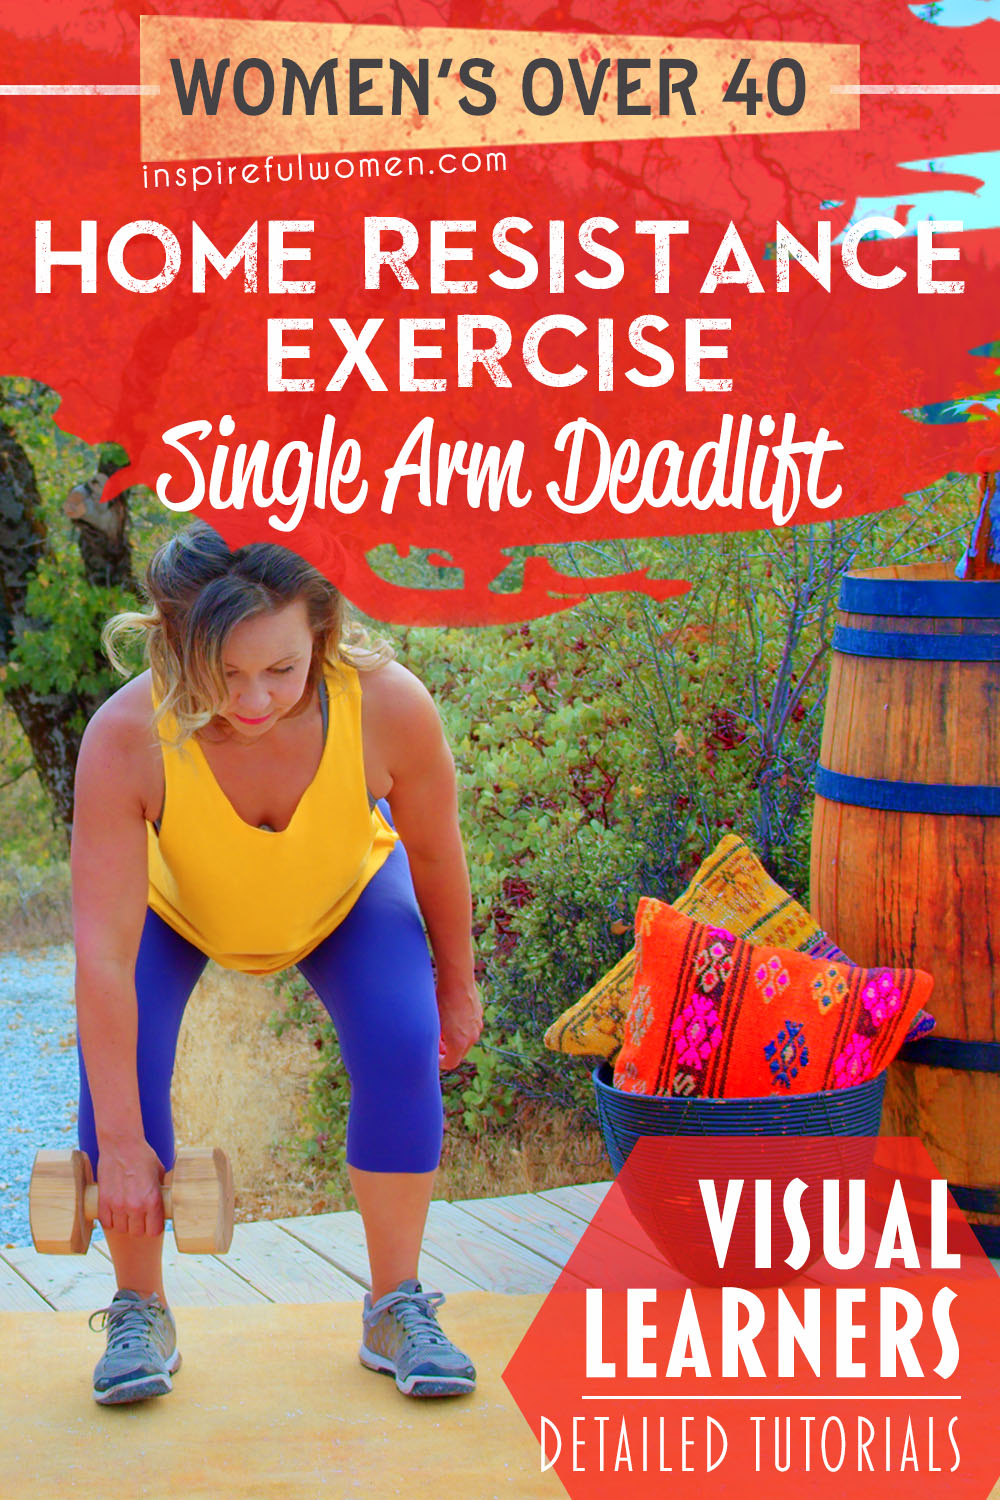 single-arm-deadlift-with-dumbbells-at-home-lower-body-exercise-for-women-over-40